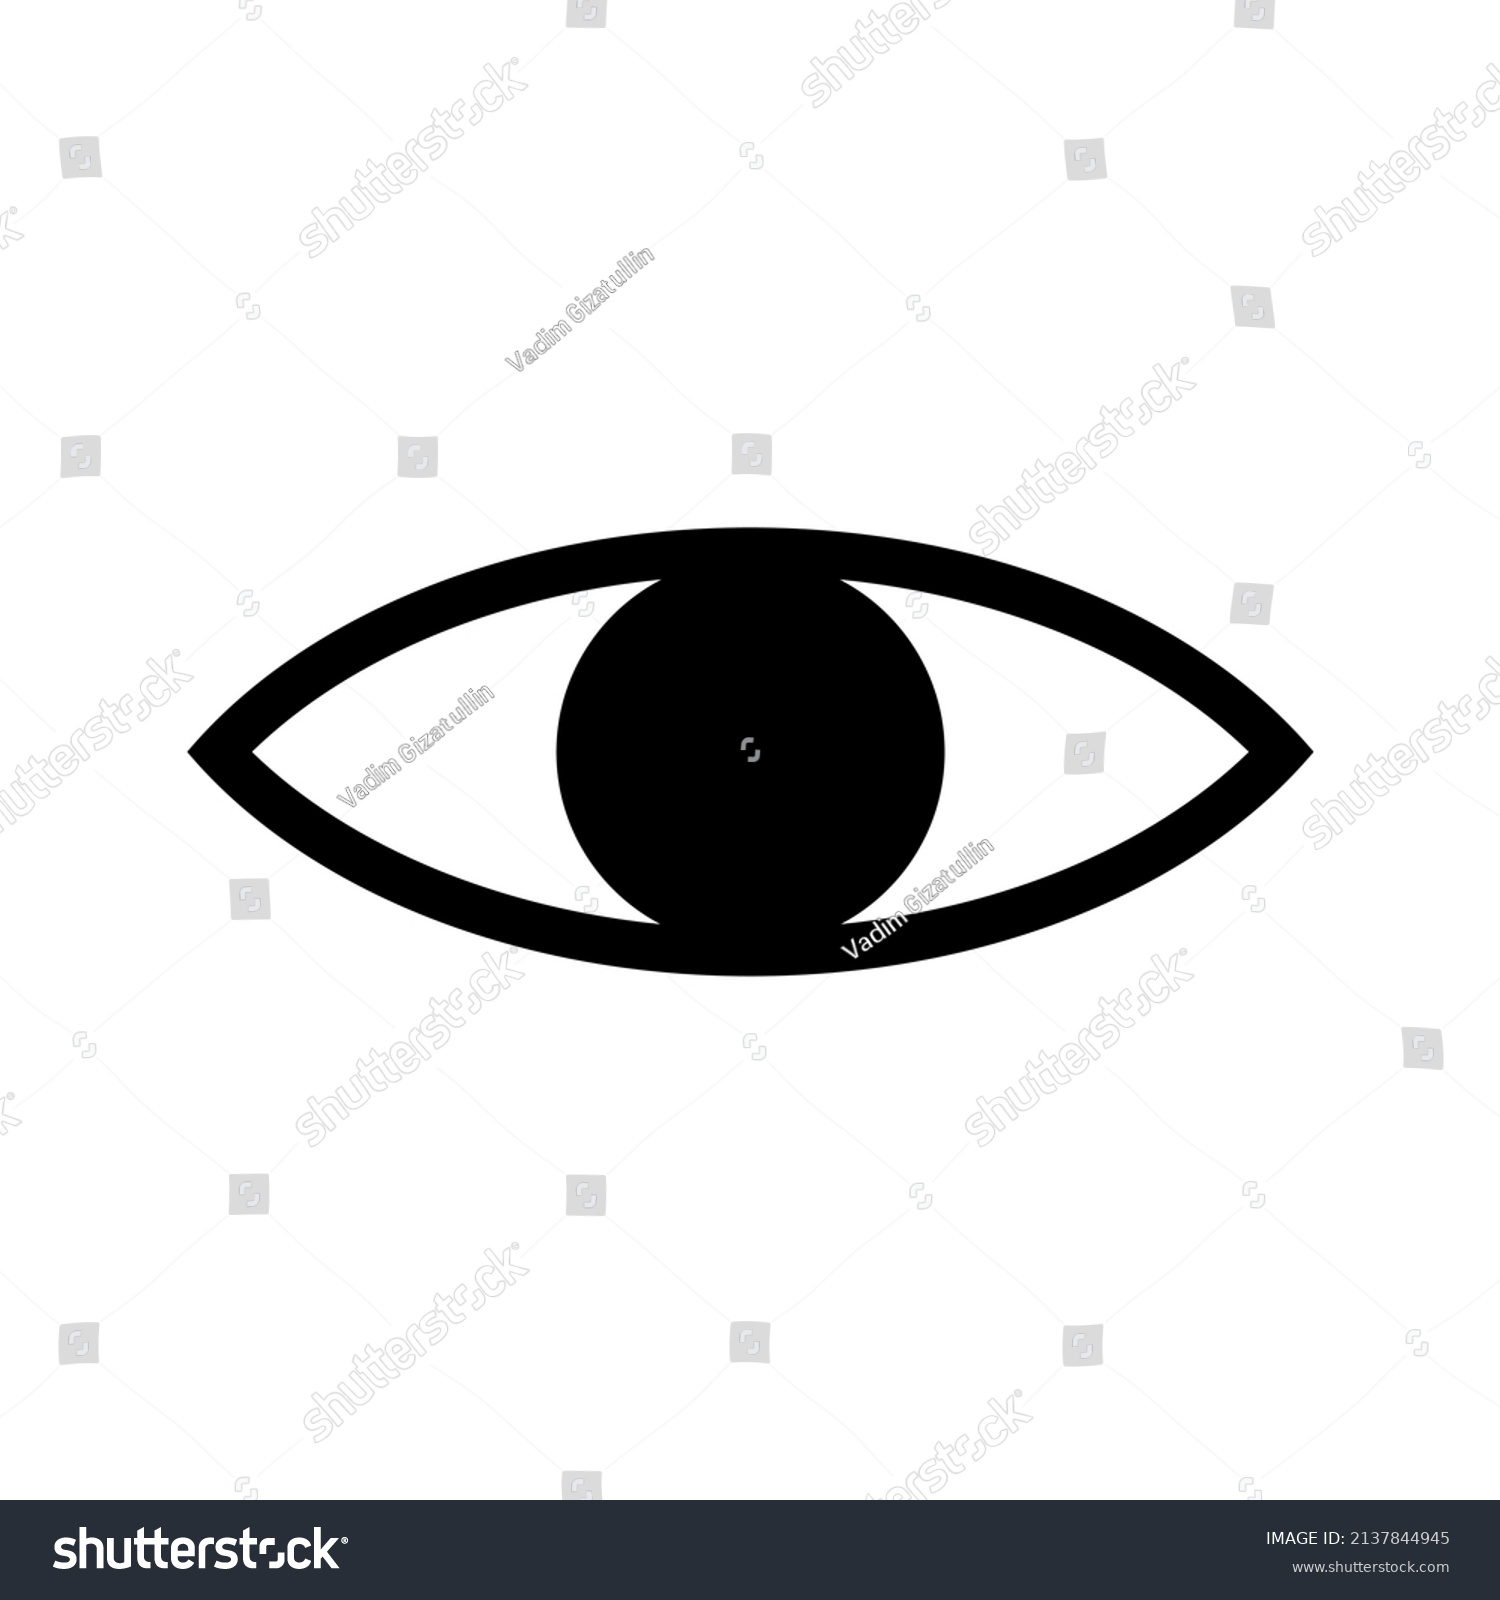 SVG of Eye icon for medical illustrations, for ophthalmologist and eye problems, retinal scan. Isolated on a white background. Vector graphics svg